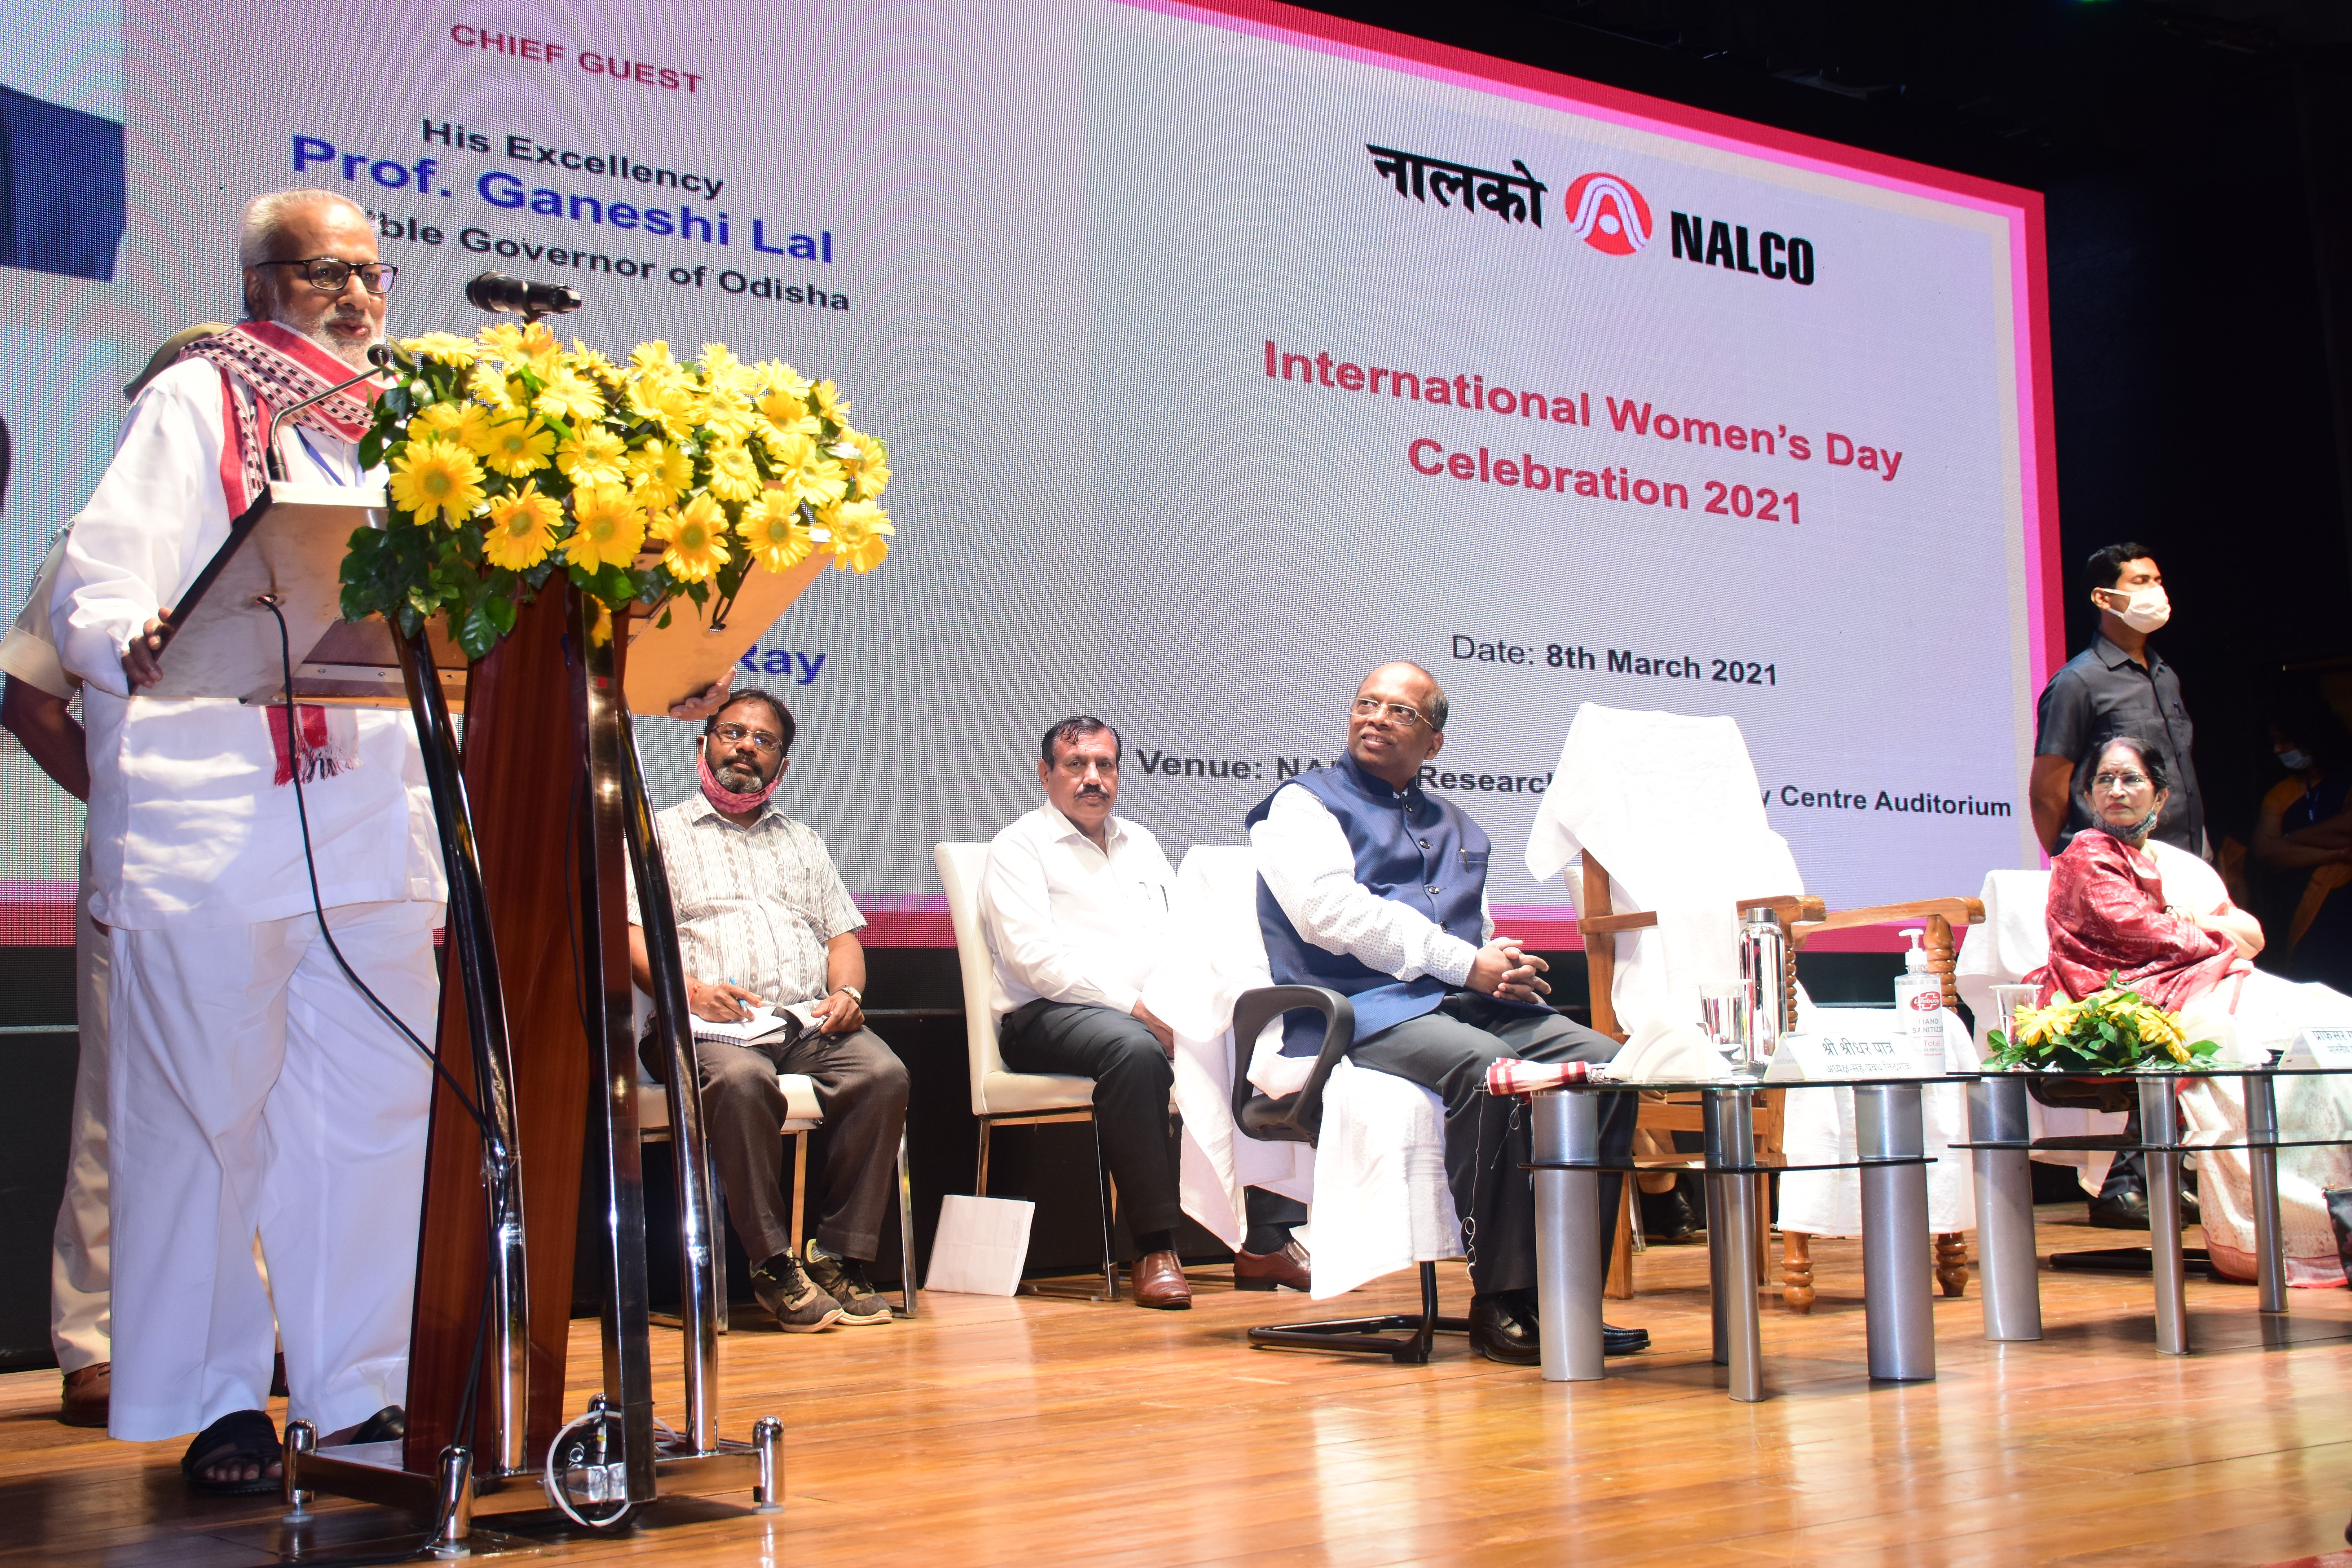 Hon’ble  Governor Prof. Ganeshi Lal with Padmashree Pratibha  Ray and CMD ,NALCO Sridhar Patra in International Women’s Day Celebrations organized by NALCO  in NALCO Research and Training Centre Bhubaneswar on 08.03.2021.